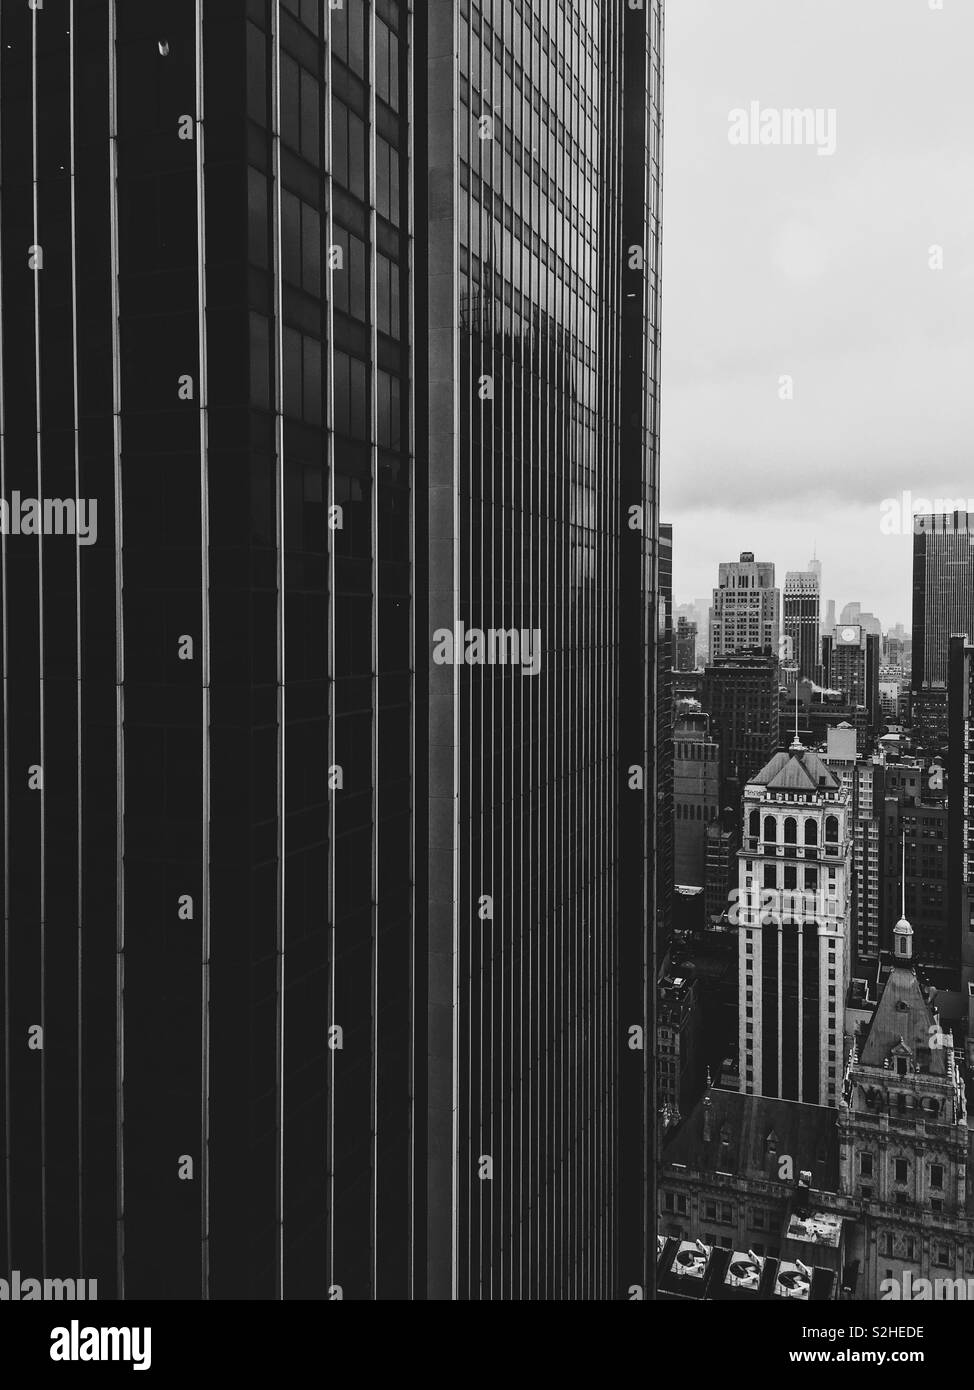 New York City skyline abstract in black and white Stock Photo